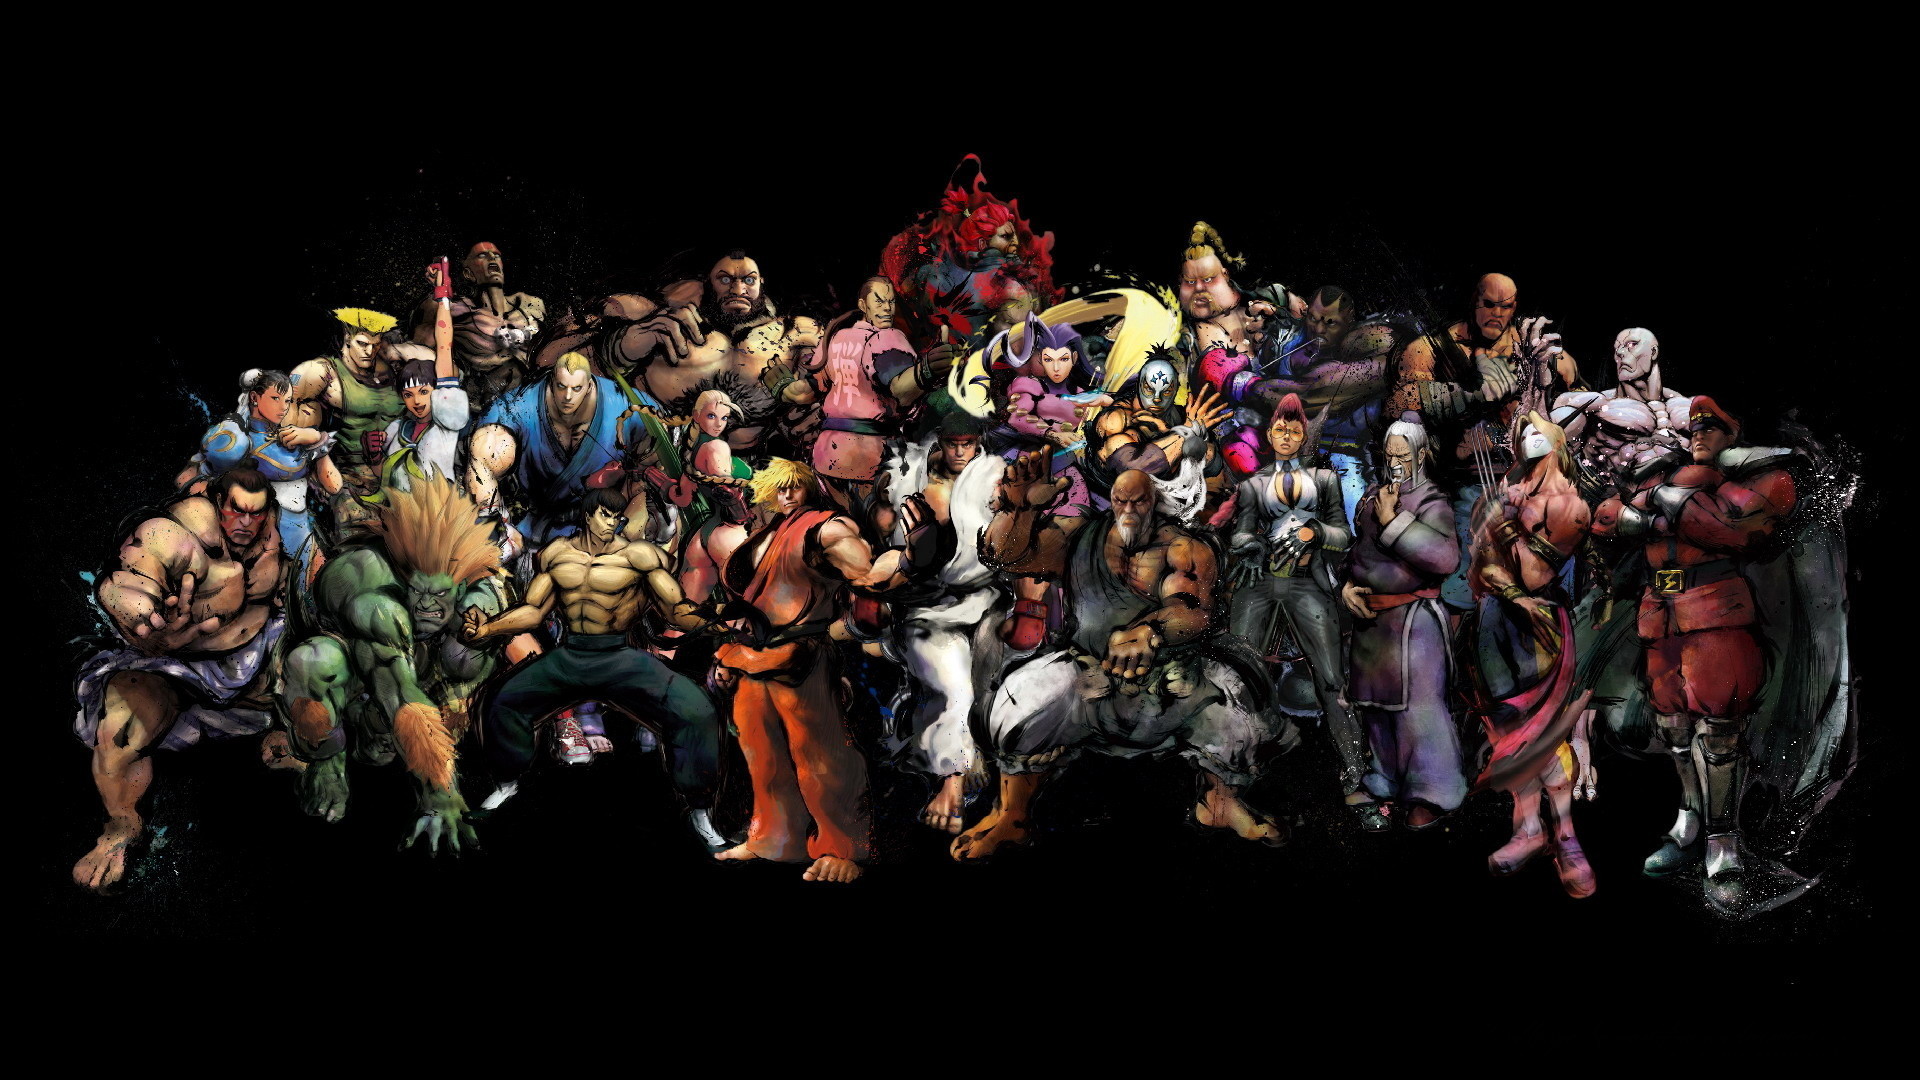 1920x1080 Street Fighter Wallpapers HD - Wallpaper Cave